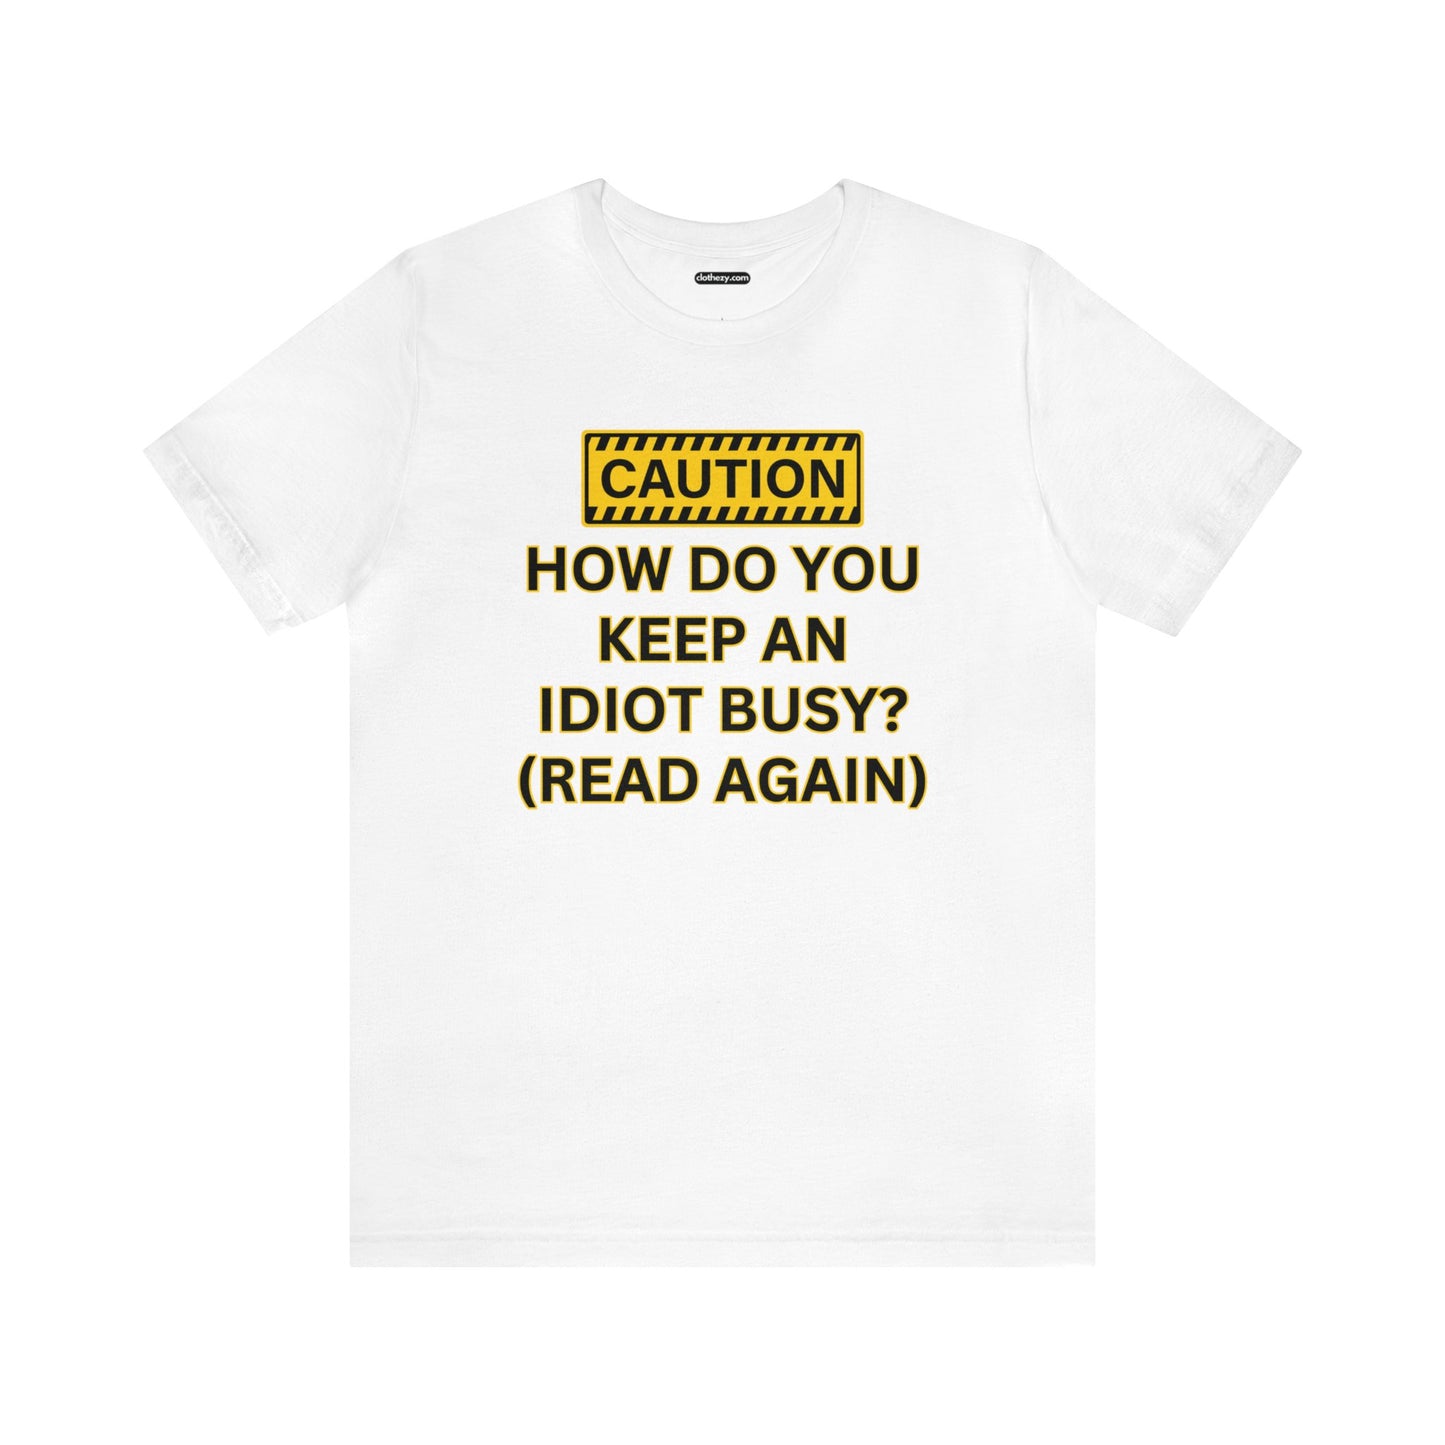 Caution How Do You Keep An Idiot Busy - Soft Cotton Adult Unisex Tee, Gift for friends and family by clothezy.com - Buy Now